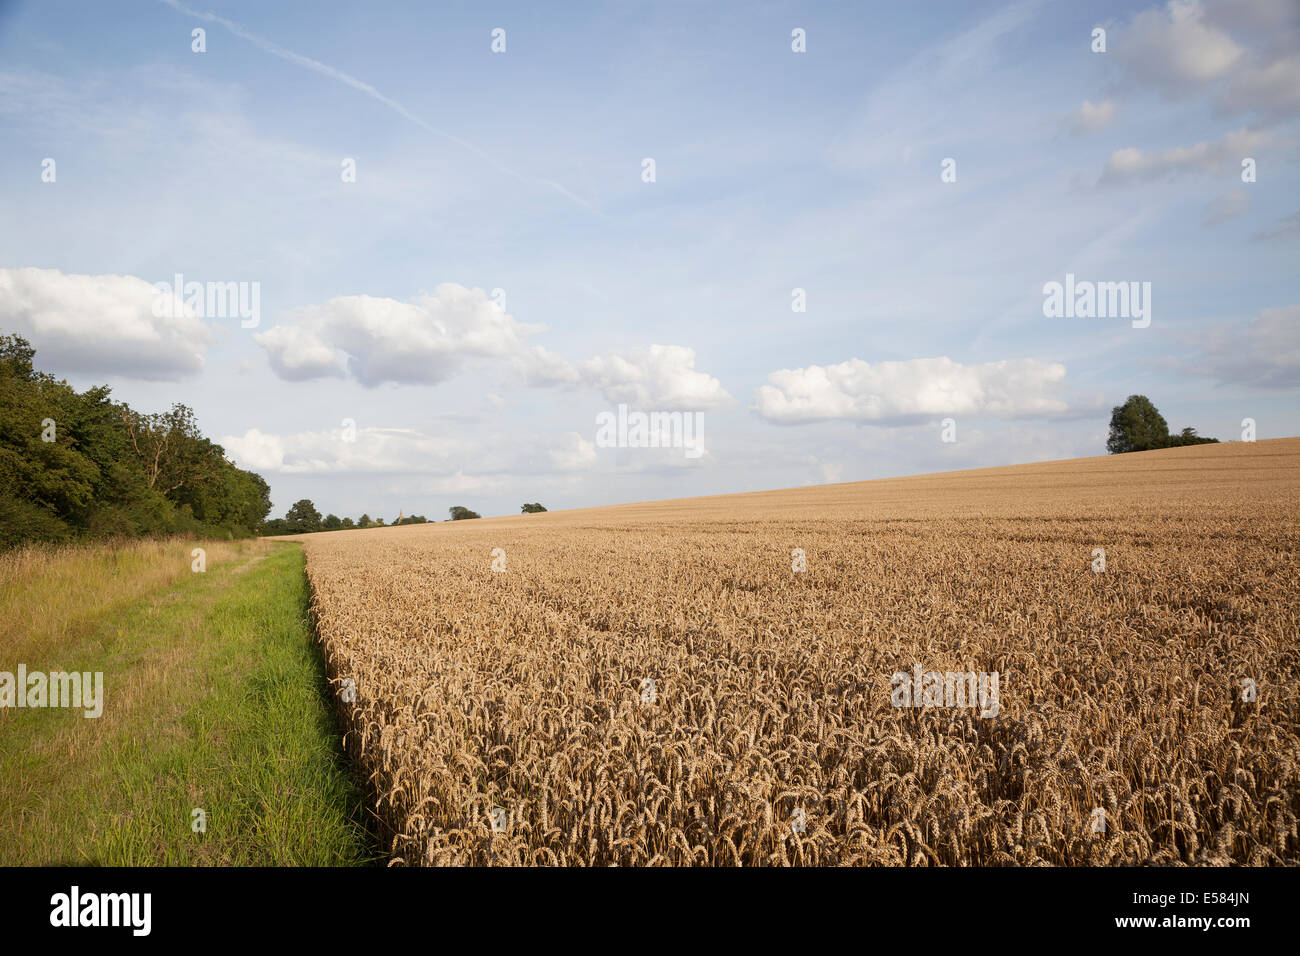 Field of wheat and grass headland on a sunny day in Northamptonshire, England, UK Stock Photo